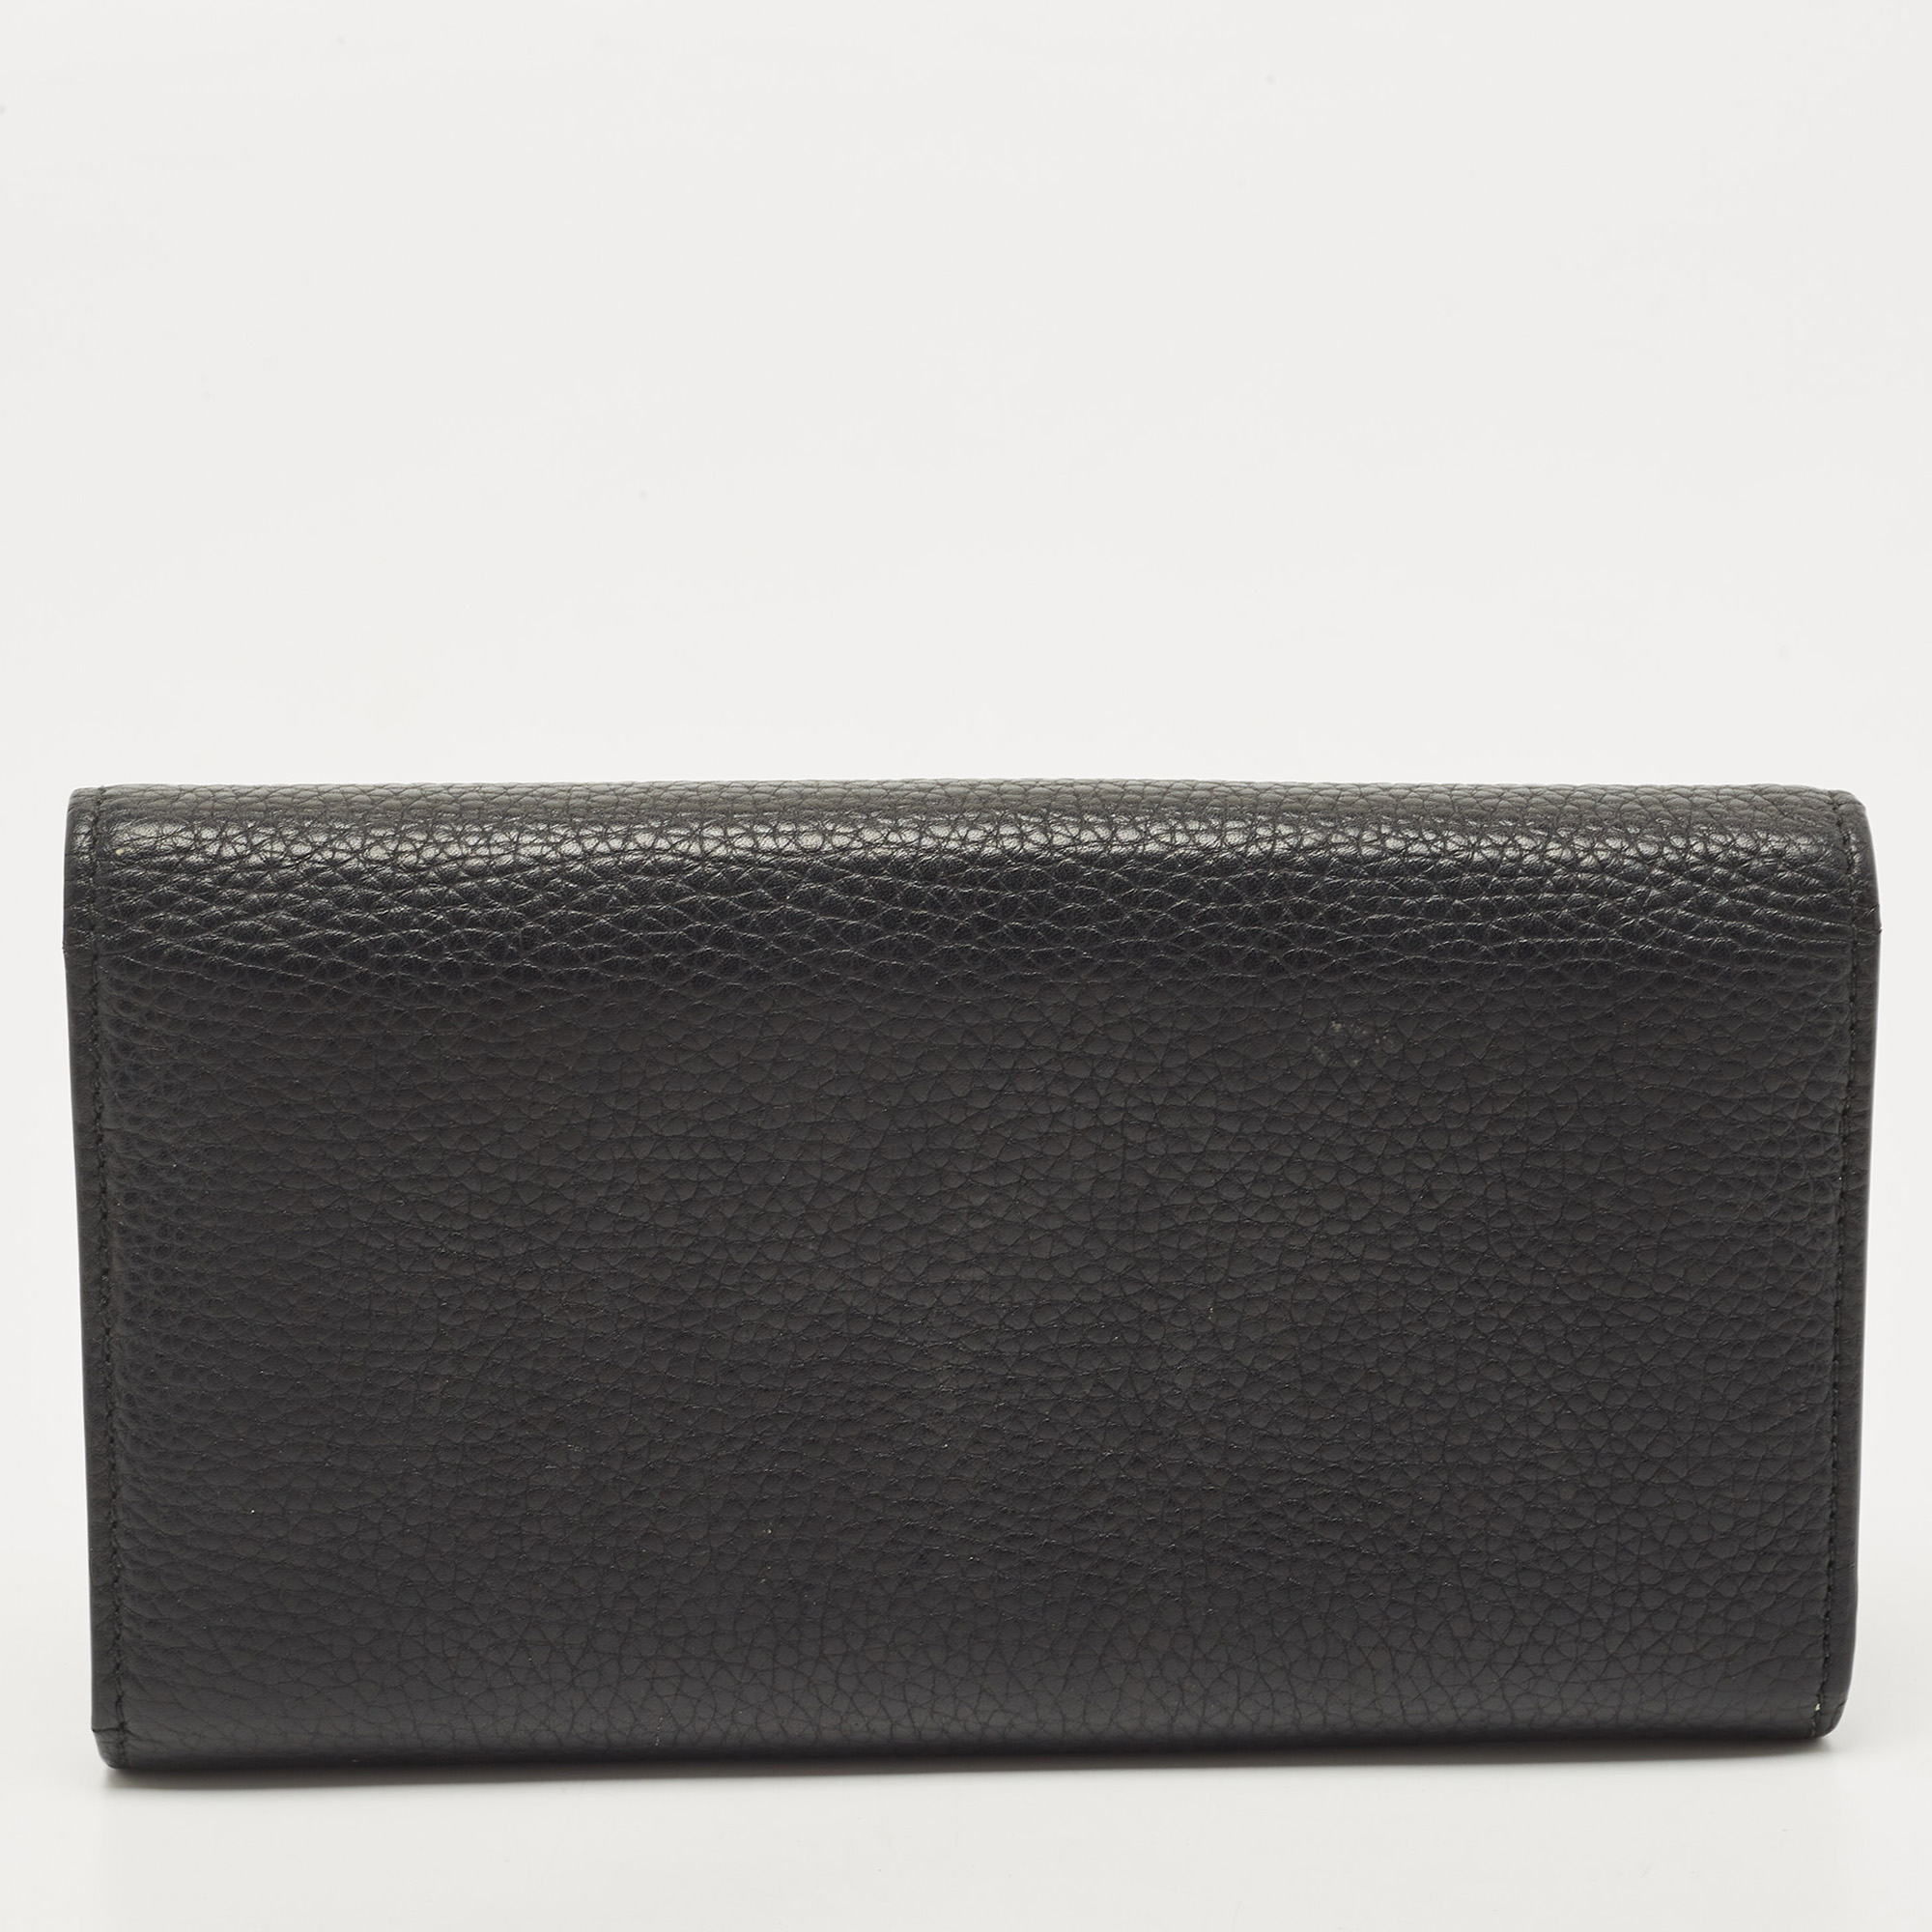 Gucci Black Leather Blind For Love Flap Continental Wallet